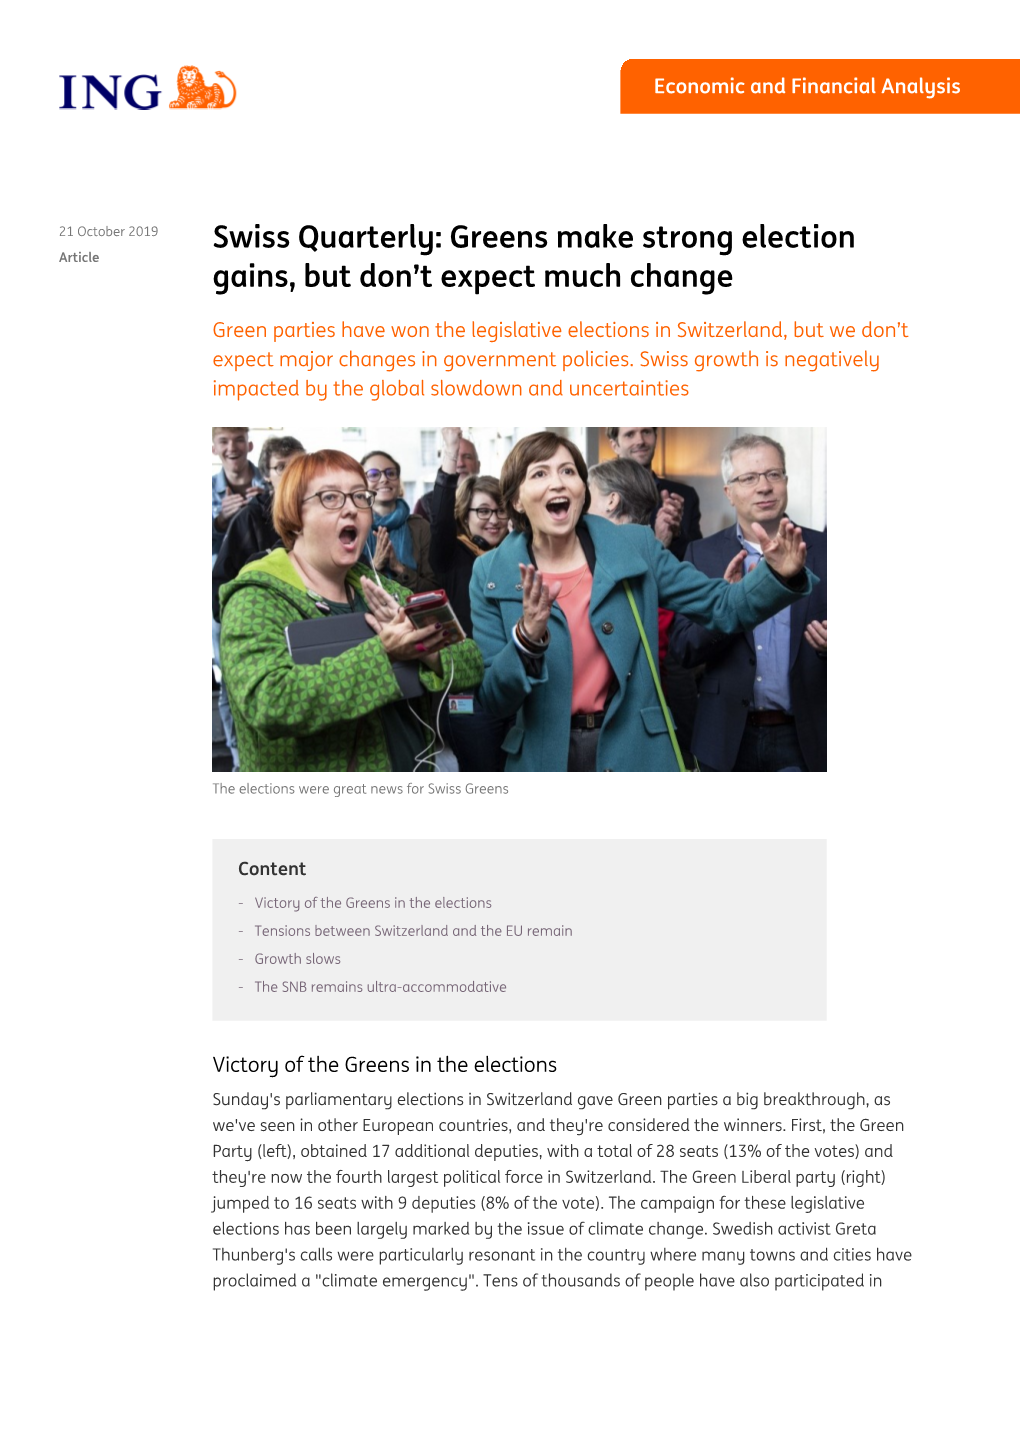 Swiss Quarterly: Greens Make Strong Election Article Gains, but Don’T Expect Much Change